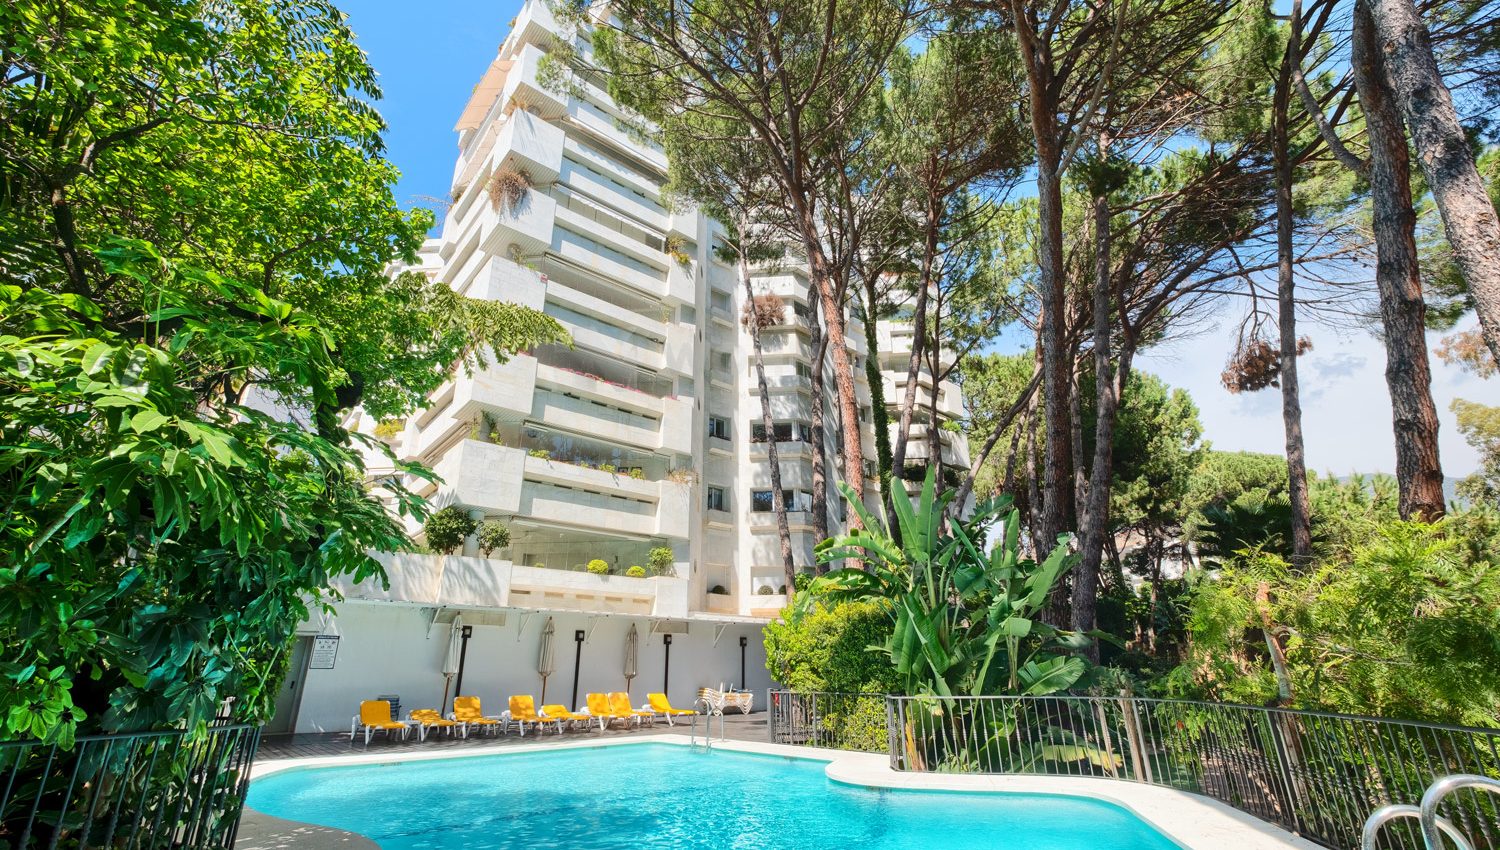 Quality luxury apartment walking distance to the Paseo and Marbella beach